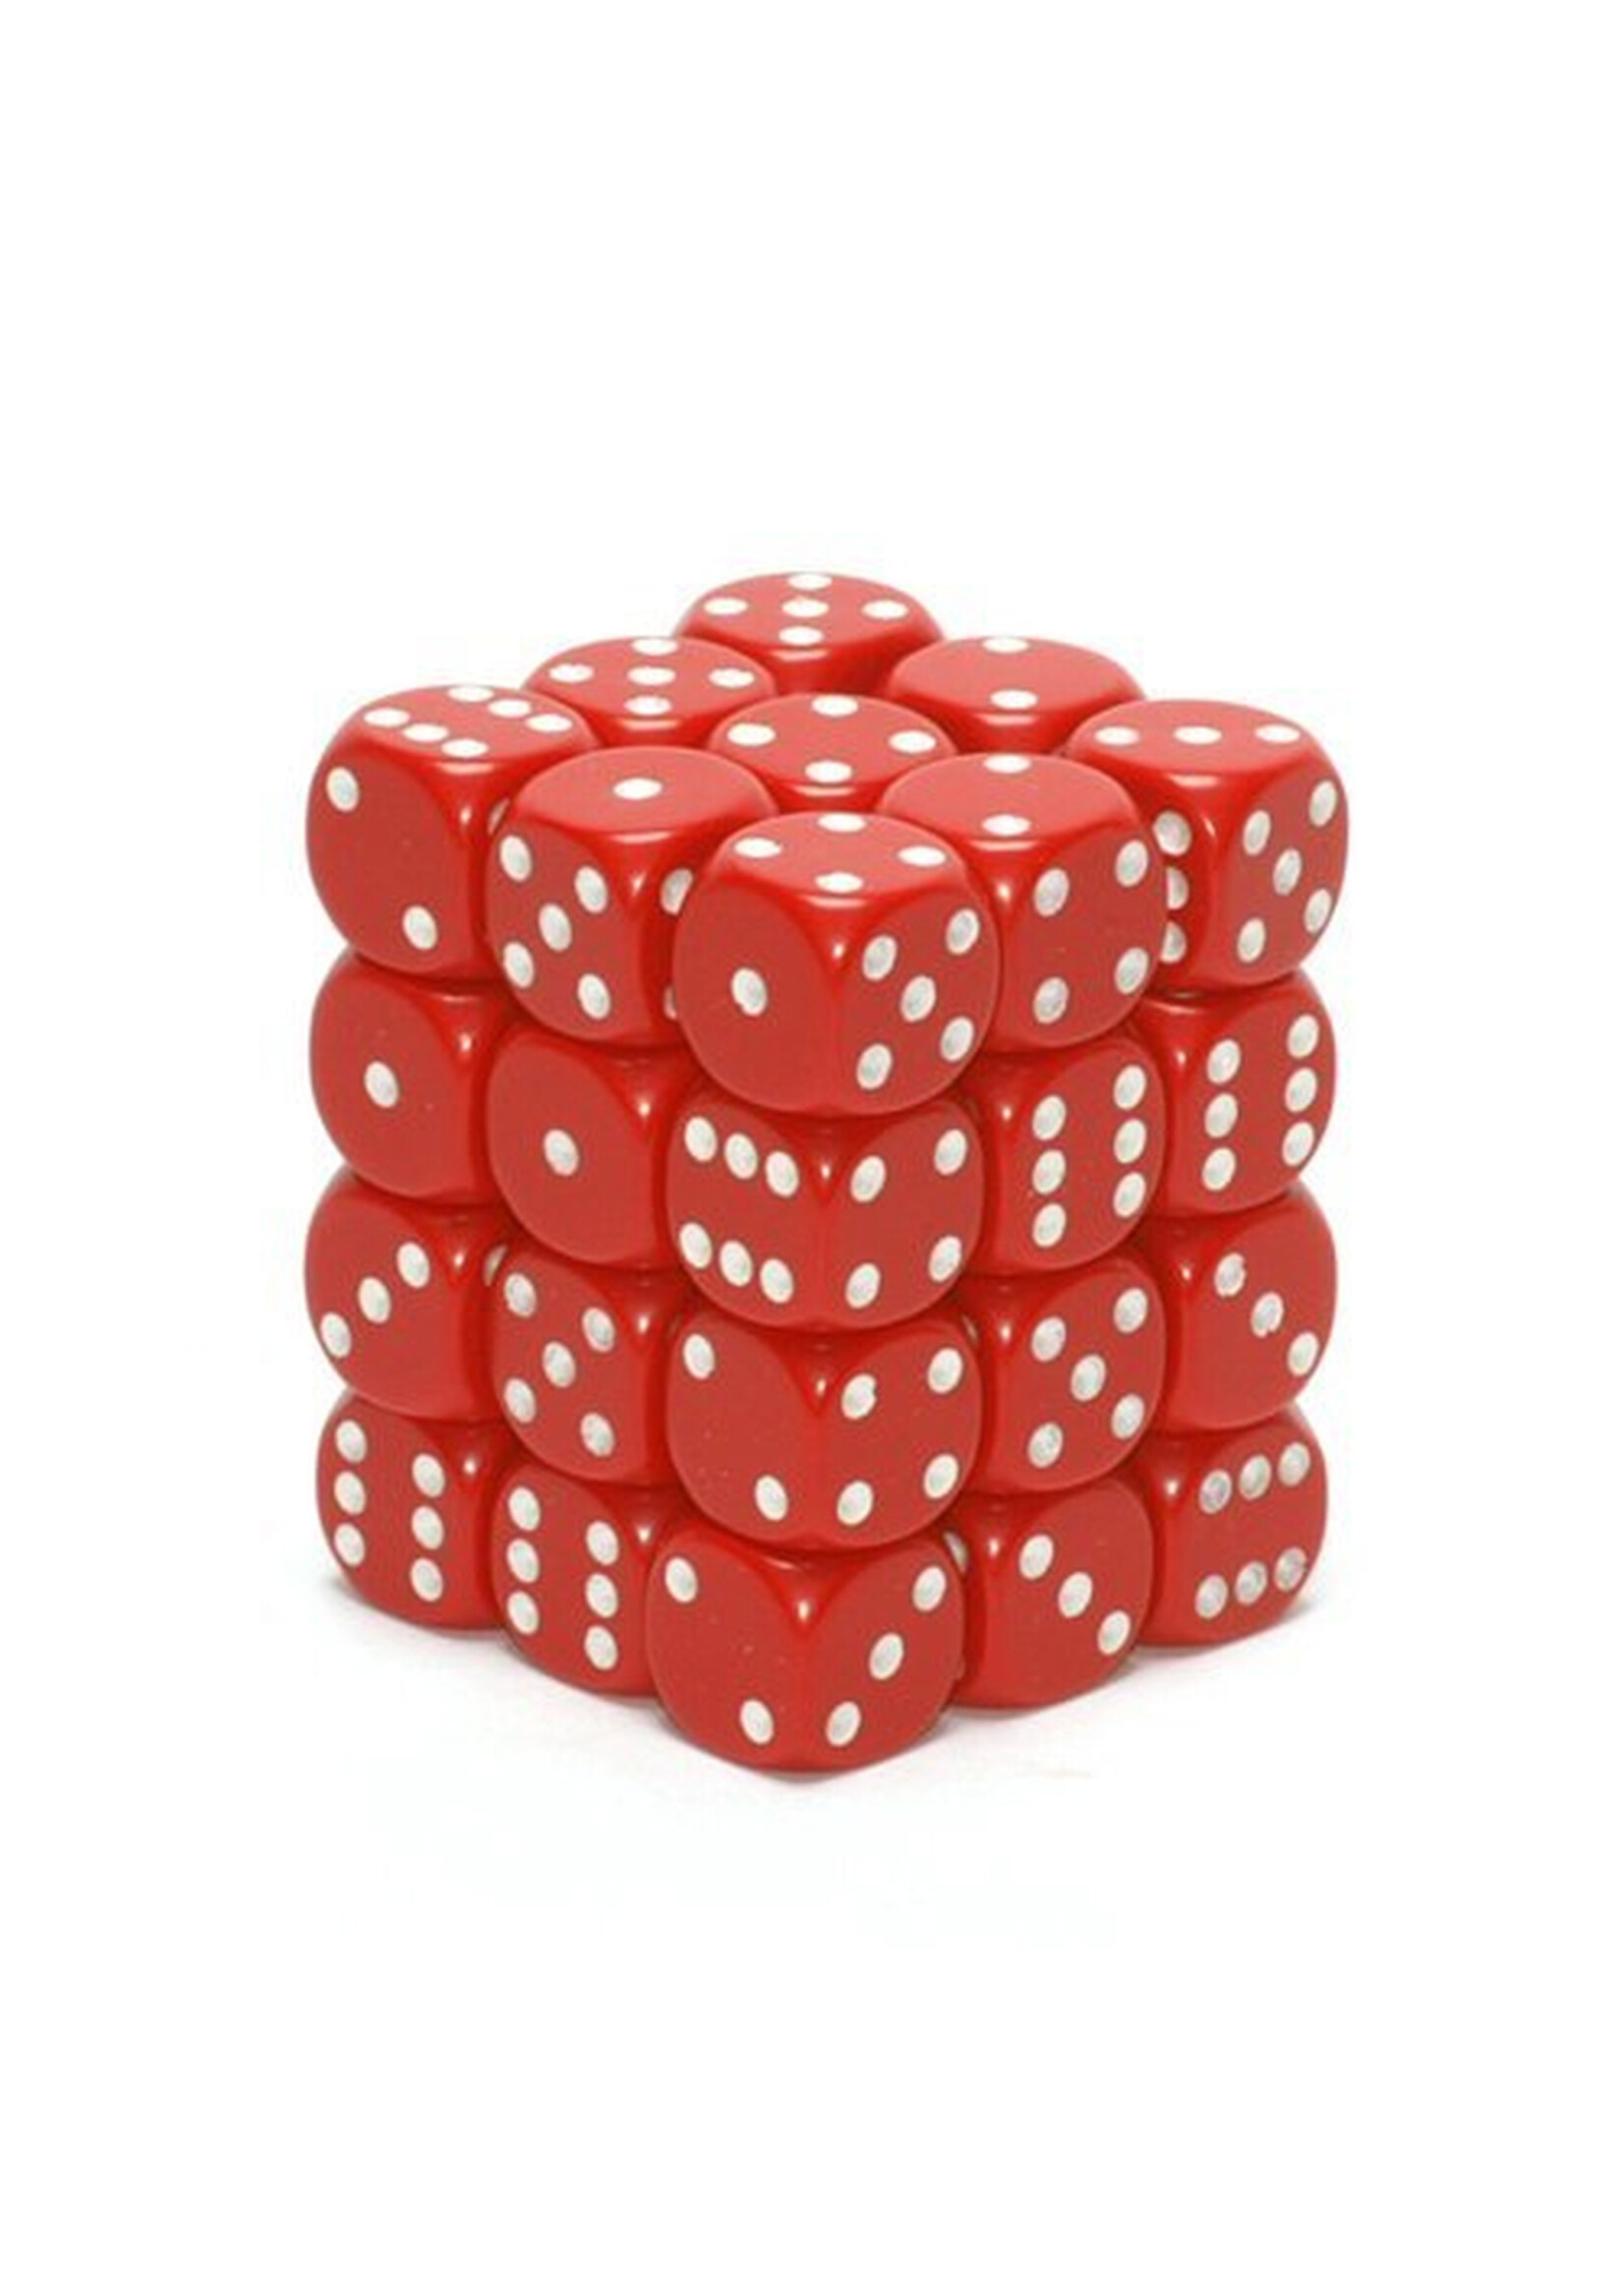 Opaque: 12mm D6 Red/White (36)